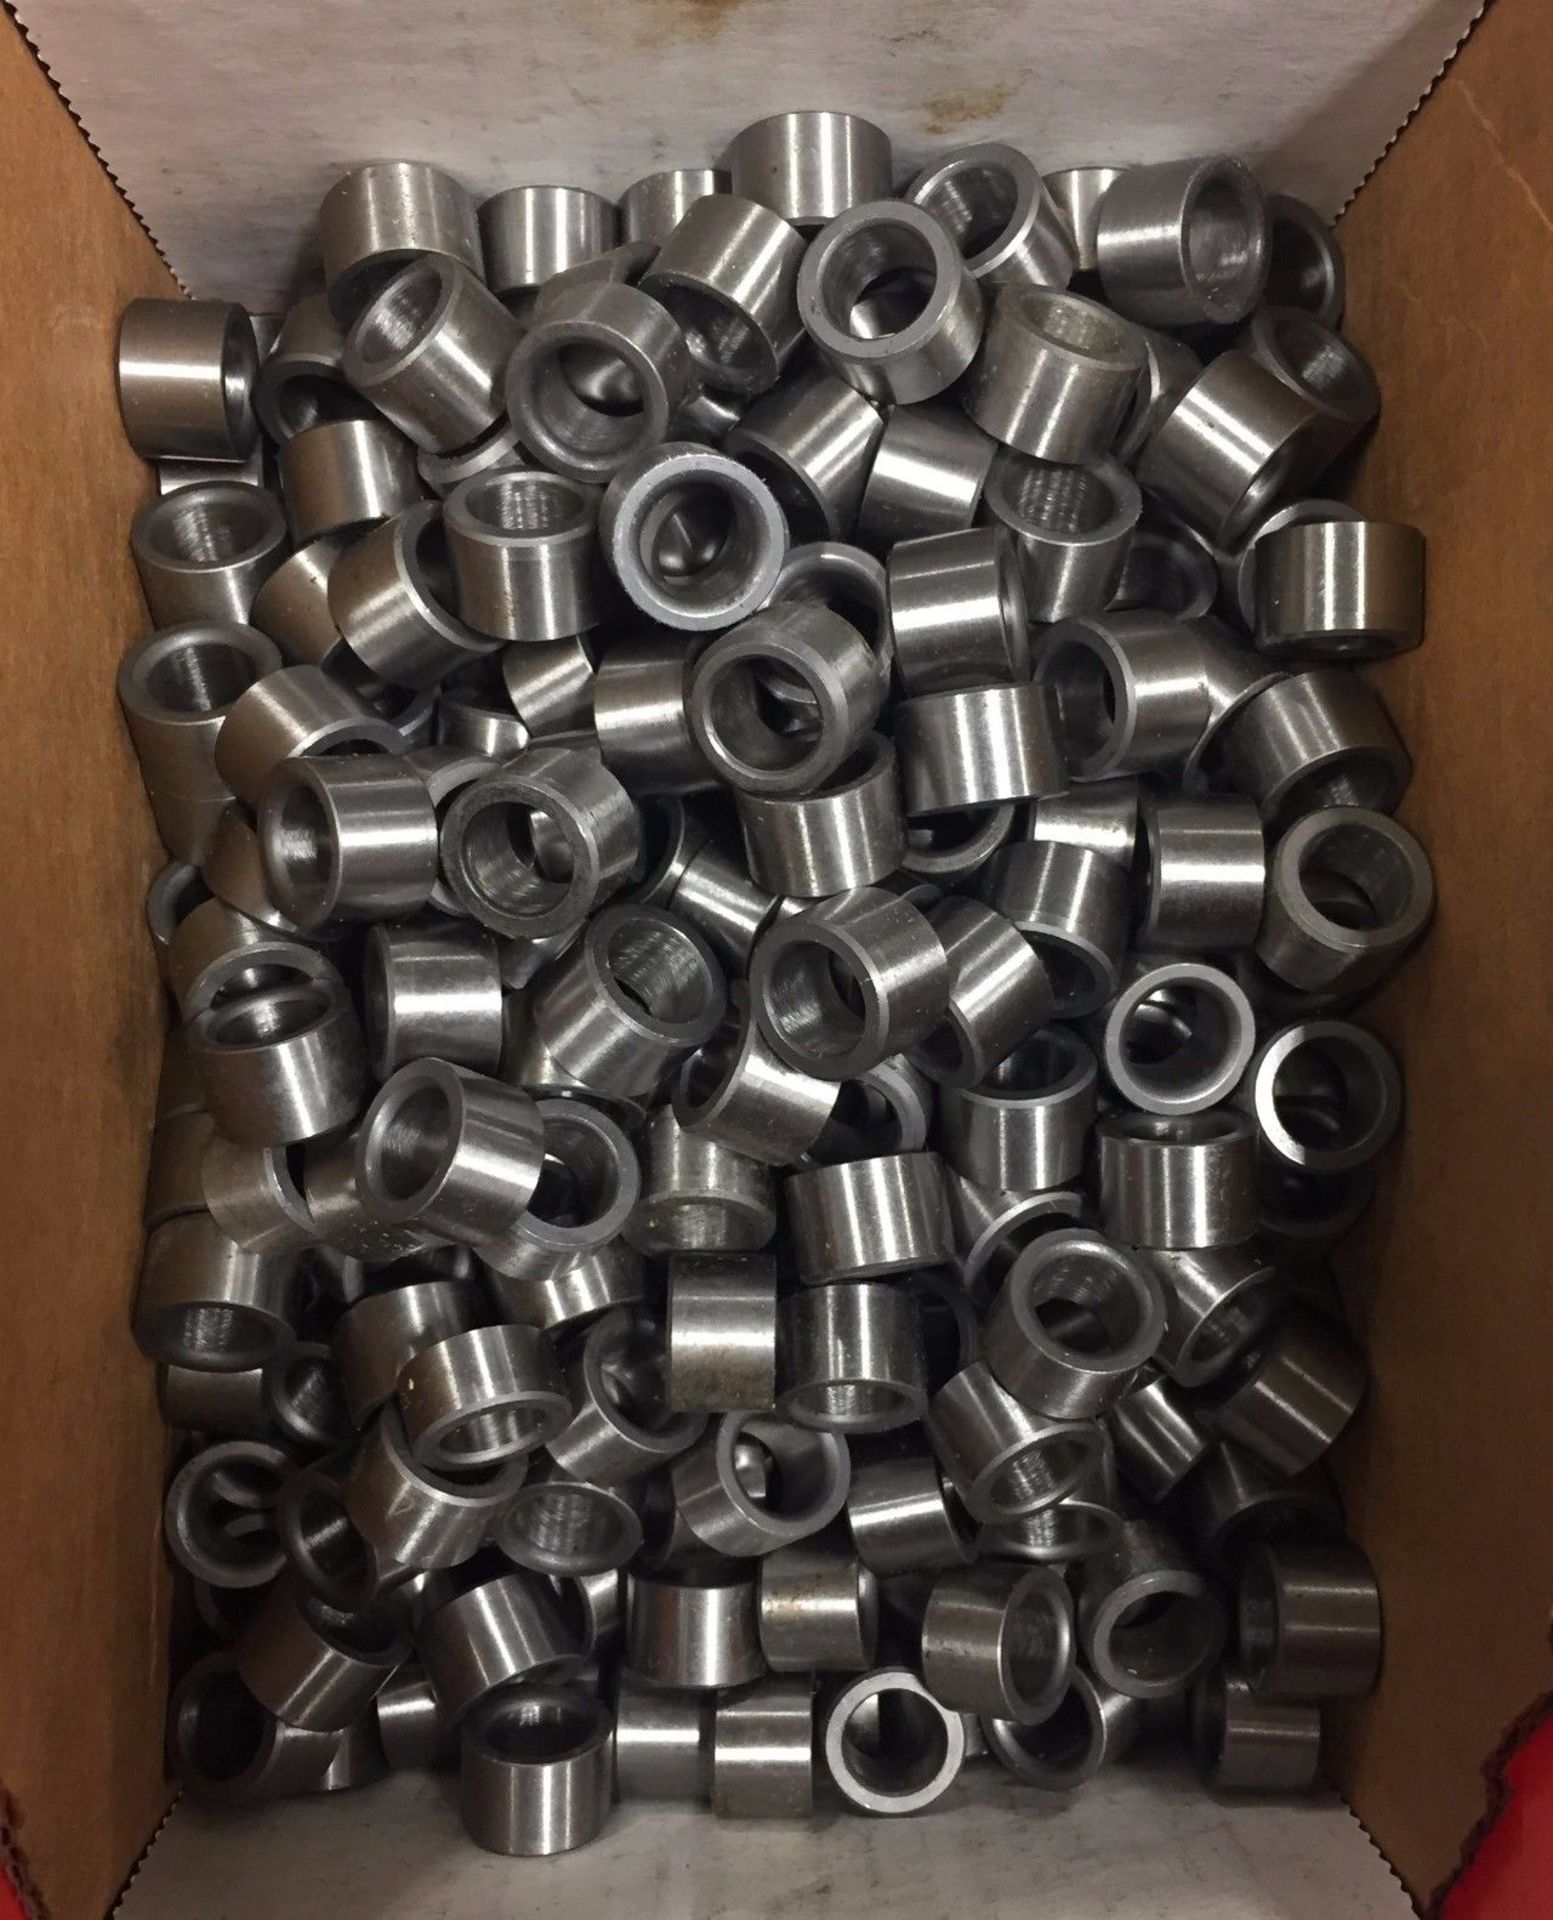 225 Pieces of Precision Ground Steel Bushings 1" O.D. x 3/4" I.D. x 1" Long